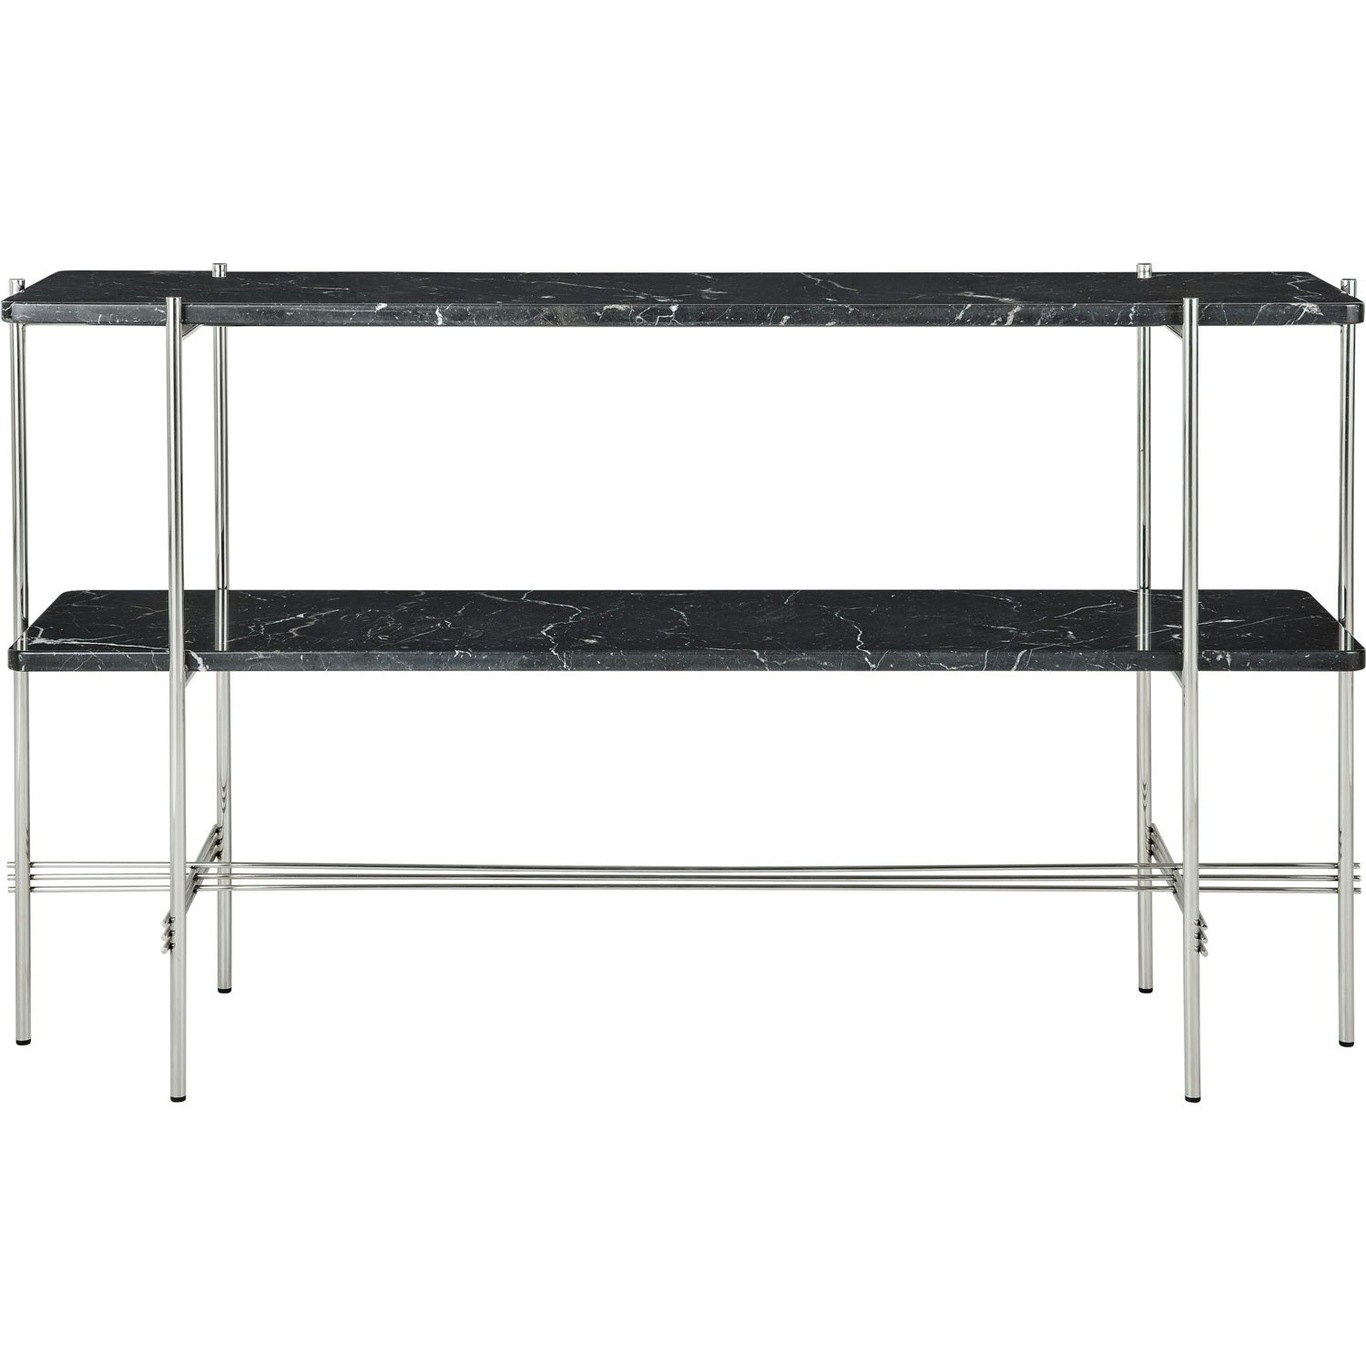 TS Console Side Table 120x30x72 cm, Polished Steel / Black Marquina marble